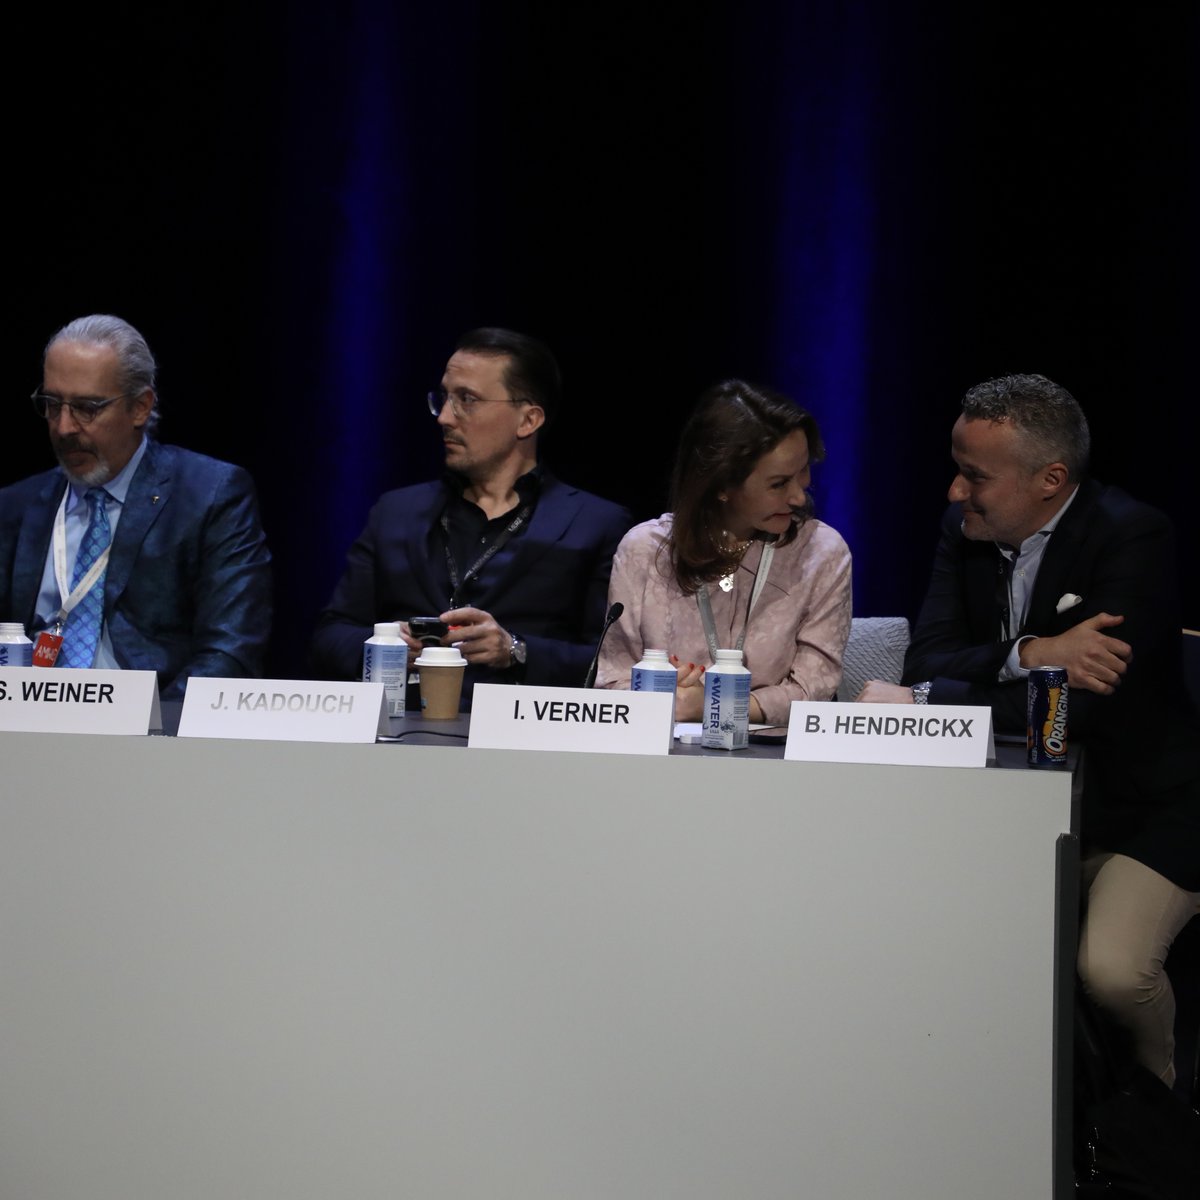 Yet another star-studded panel of experts at #AMWC 🌟
 
To be the best, one must learn from the best. All AMWC faculty are eminent speakers who are eager to share their world-class expertise with you. 

#AMWCMonaco #AMWCConference #Monaco #Aestheticmedicine #Antiagingmedicine